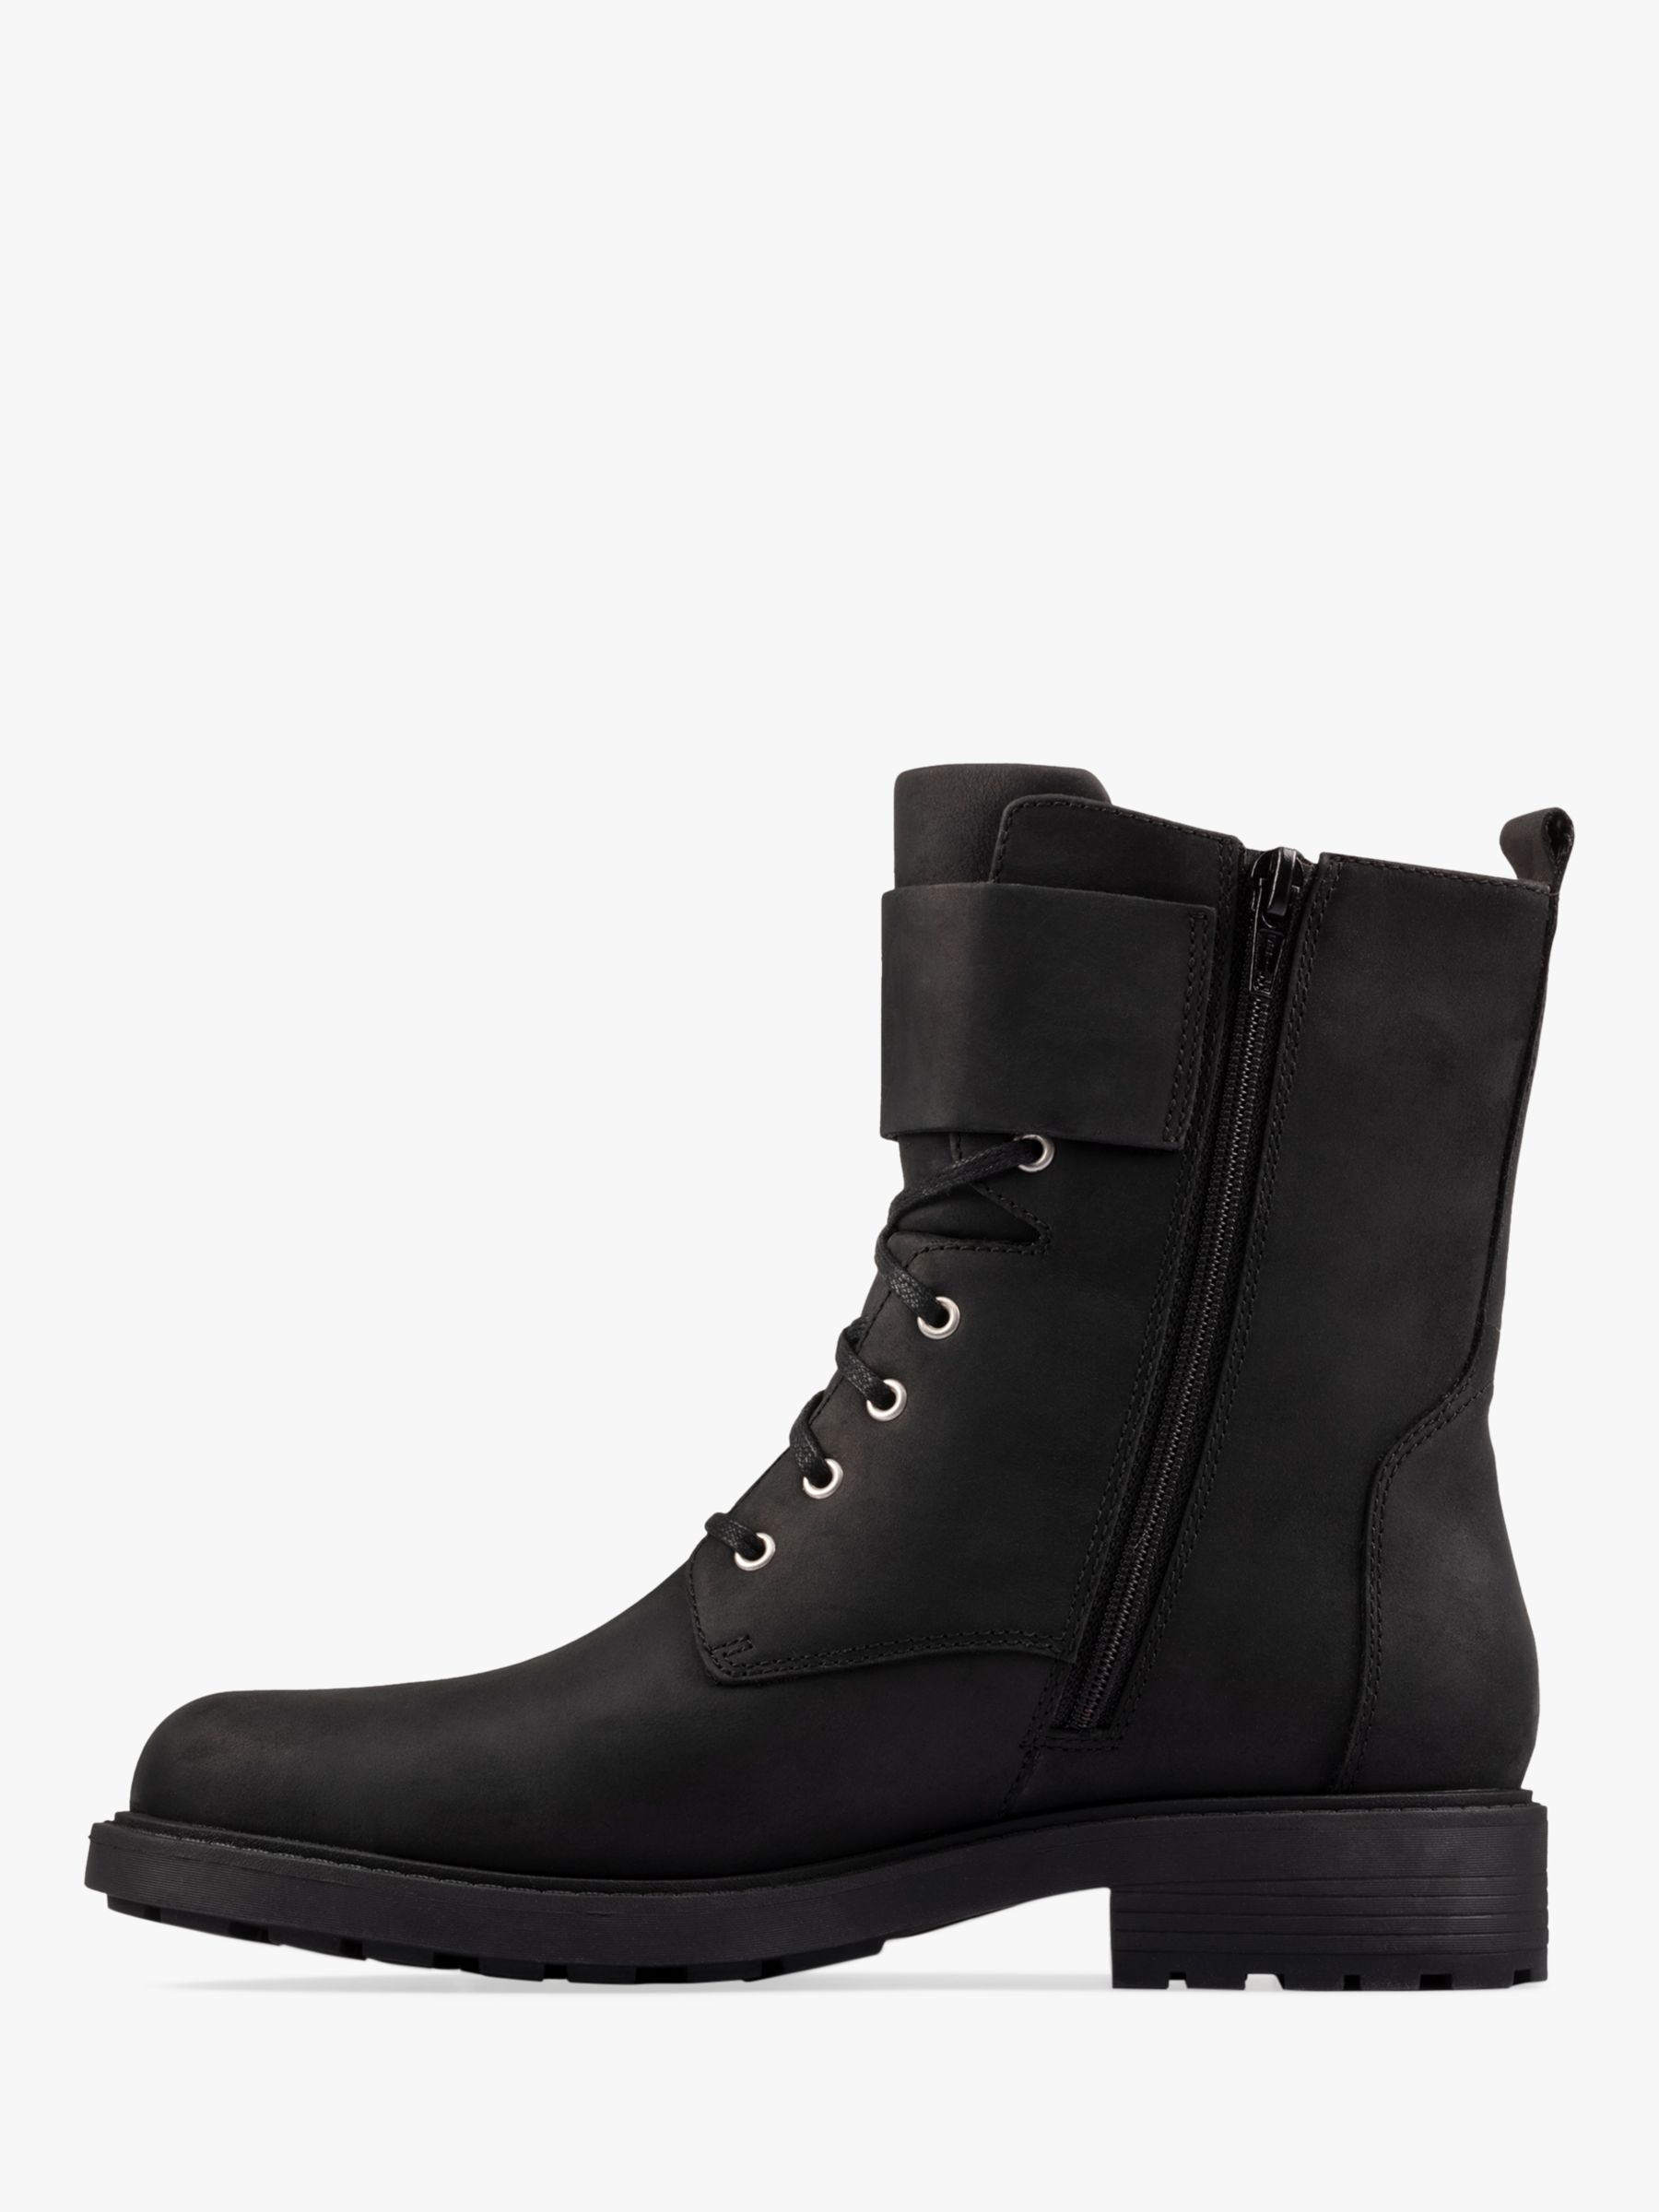 Clarks Orinoco 2 Leather Lace Up Ankle Boots, Black at John Lewis ...